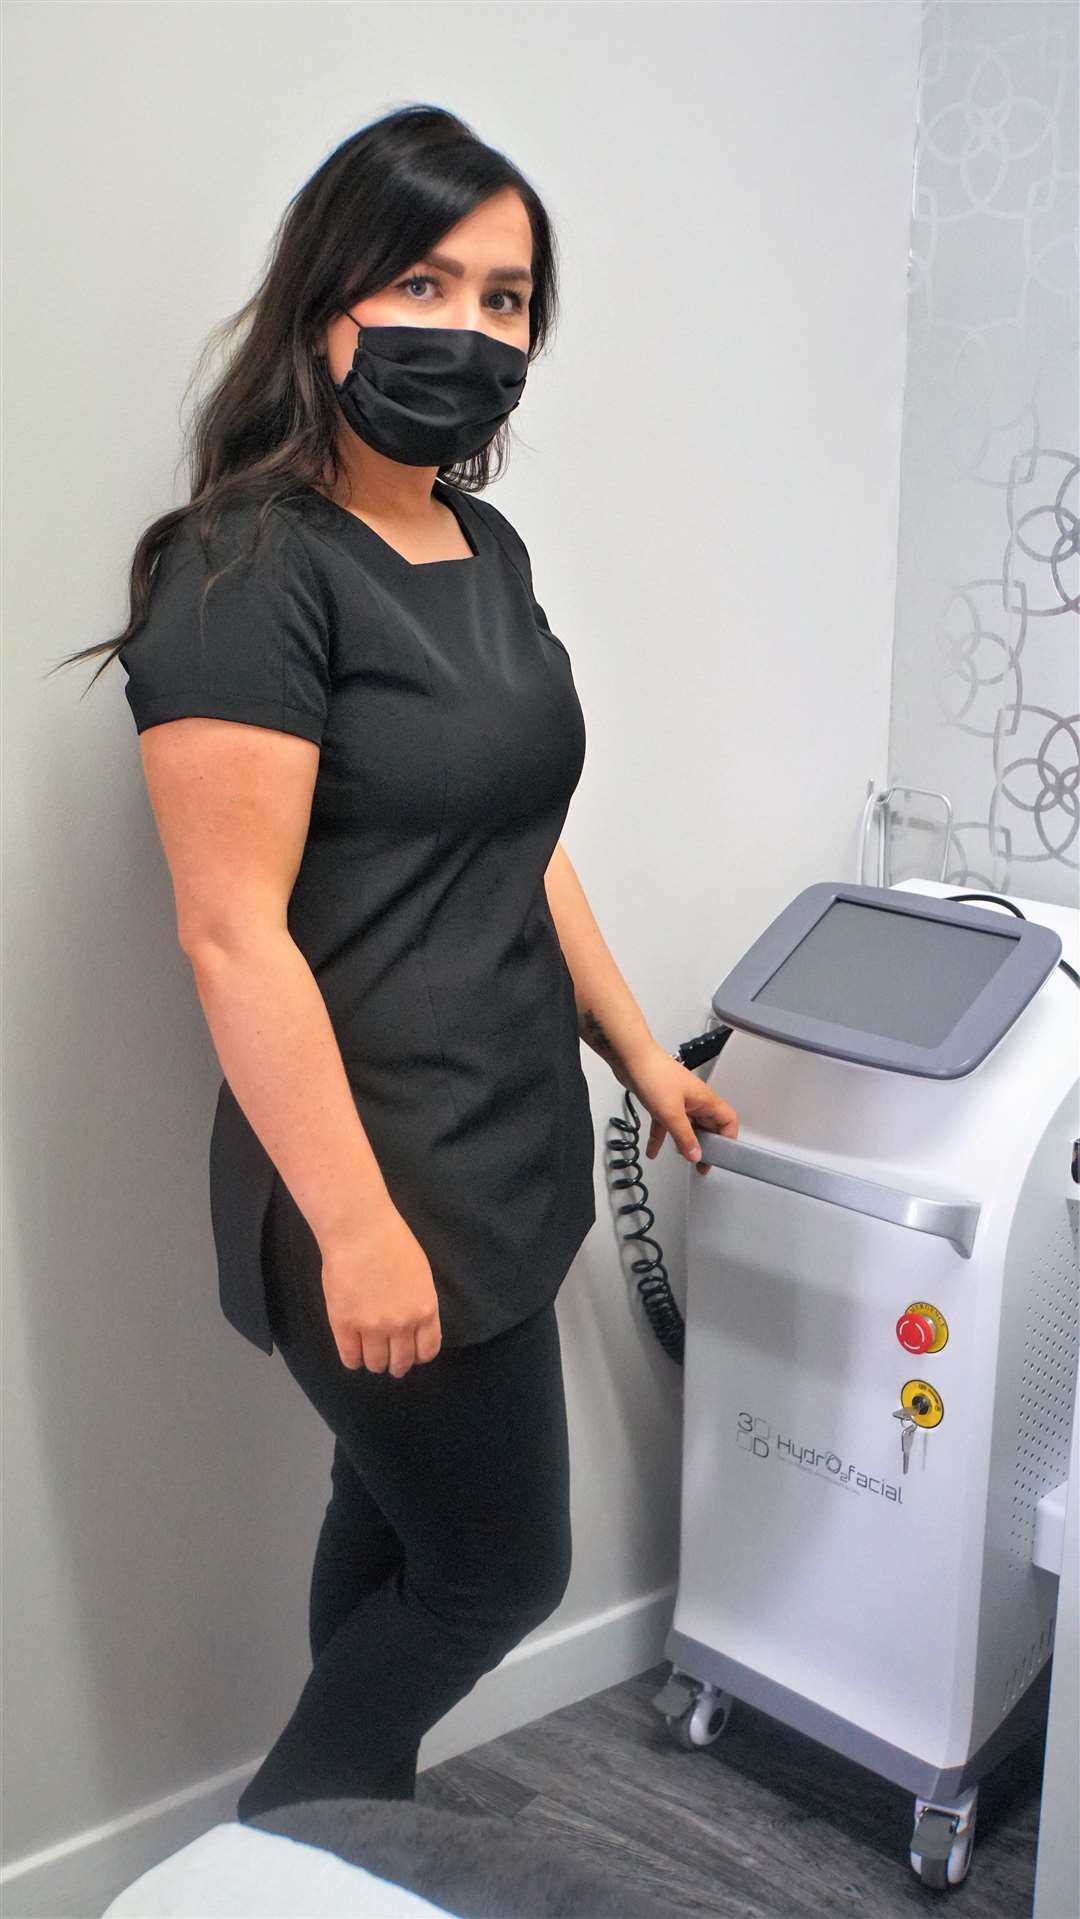 Terren with the new 3D-HydrO2 Facial machine she purchased during lockdown.